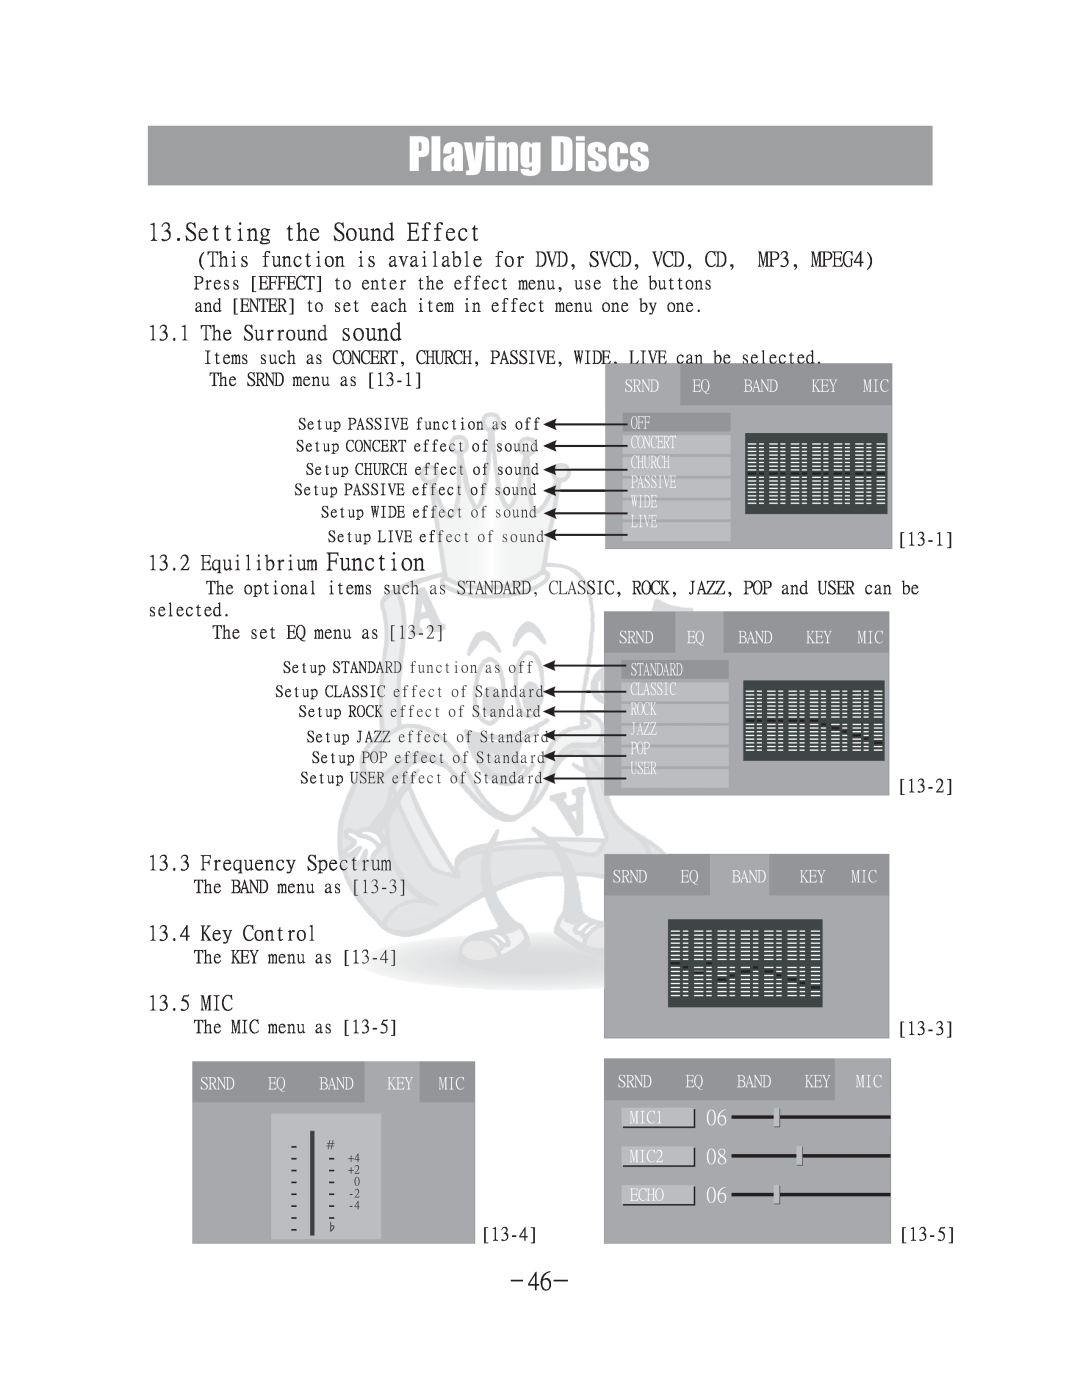 Acesonic DGX-400 user manual Setting the Sound Effect, Playing Discs 